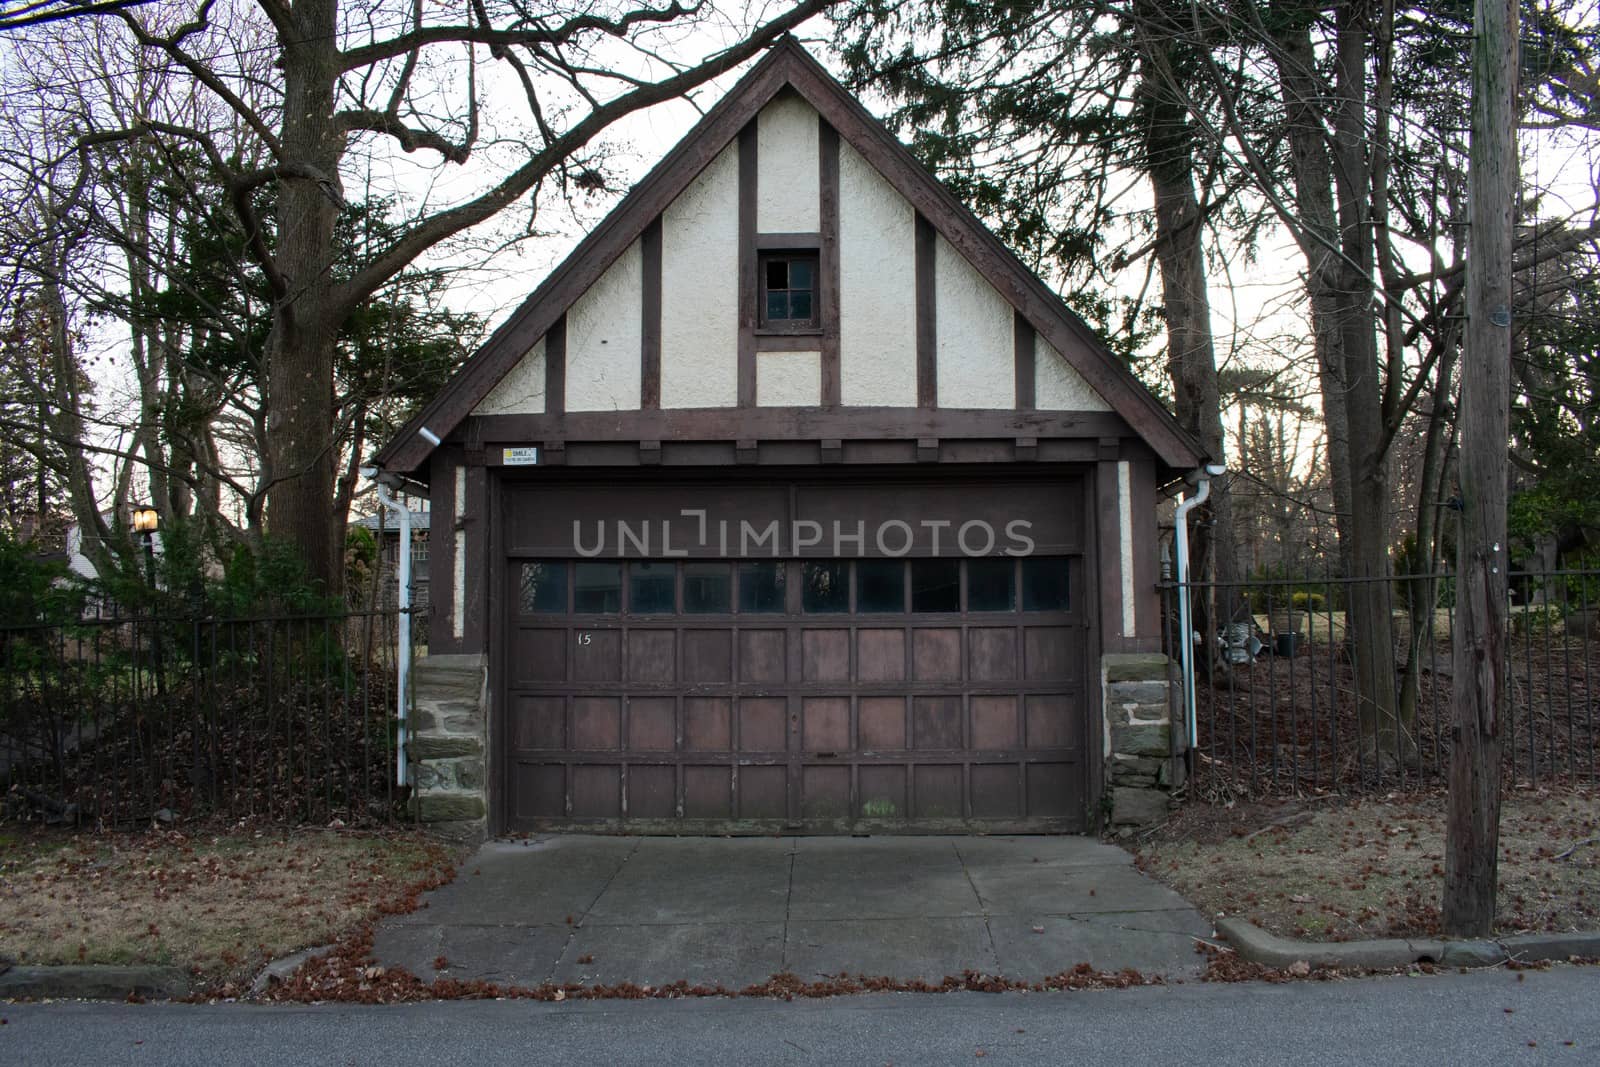 An Old-Fashioned Brown and White Garage on a Cloudy Day